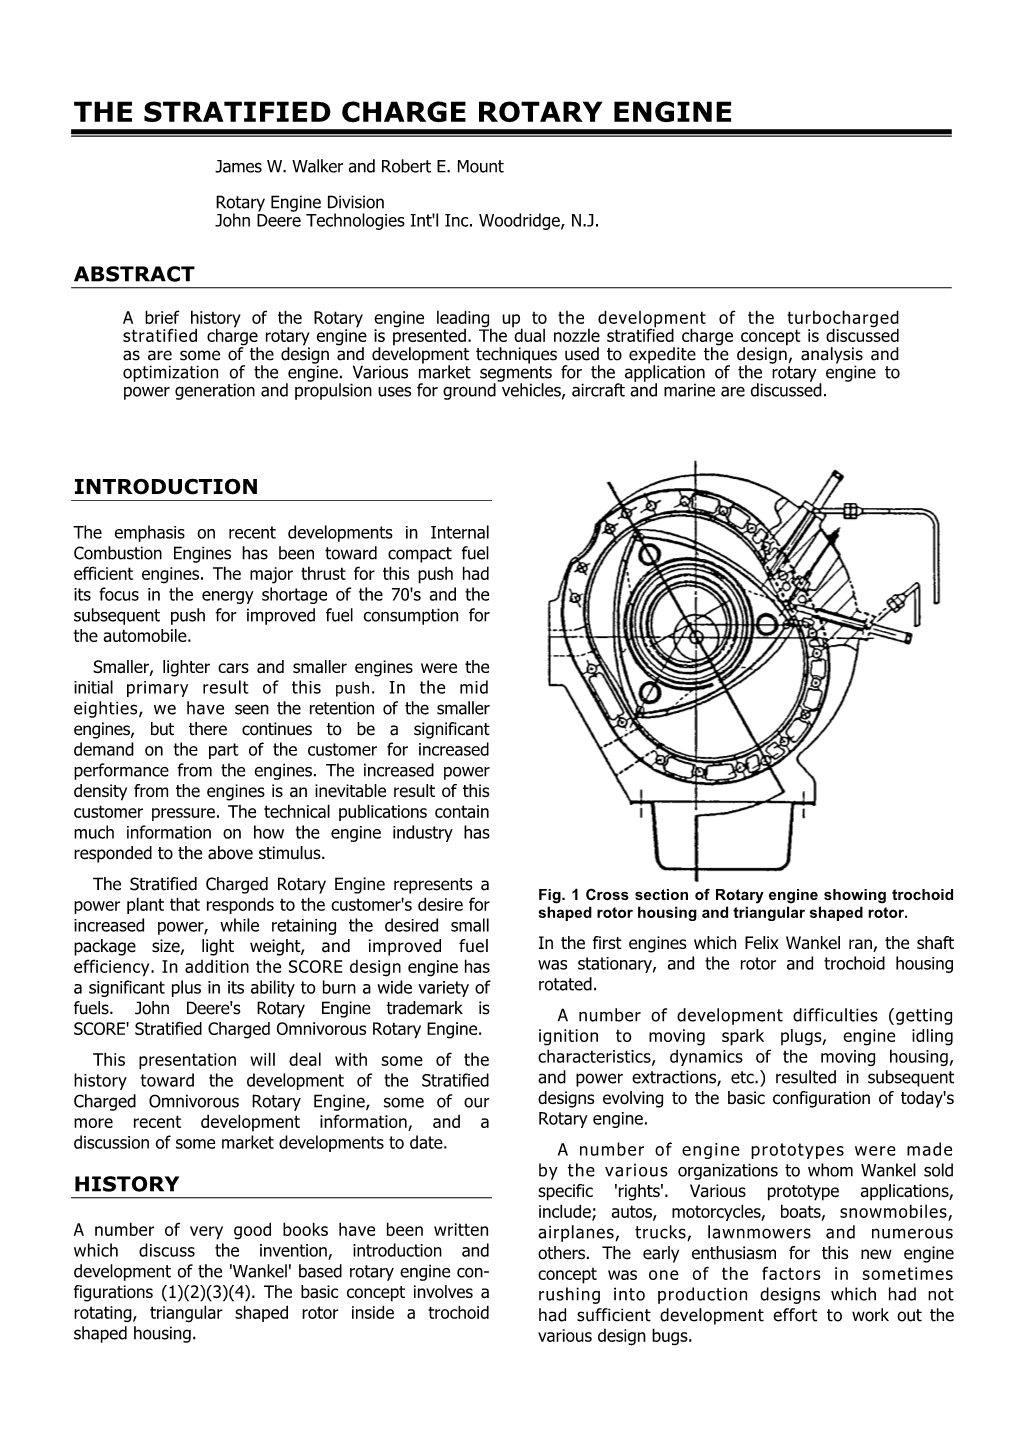 The Stratified Charge Rotary Engine